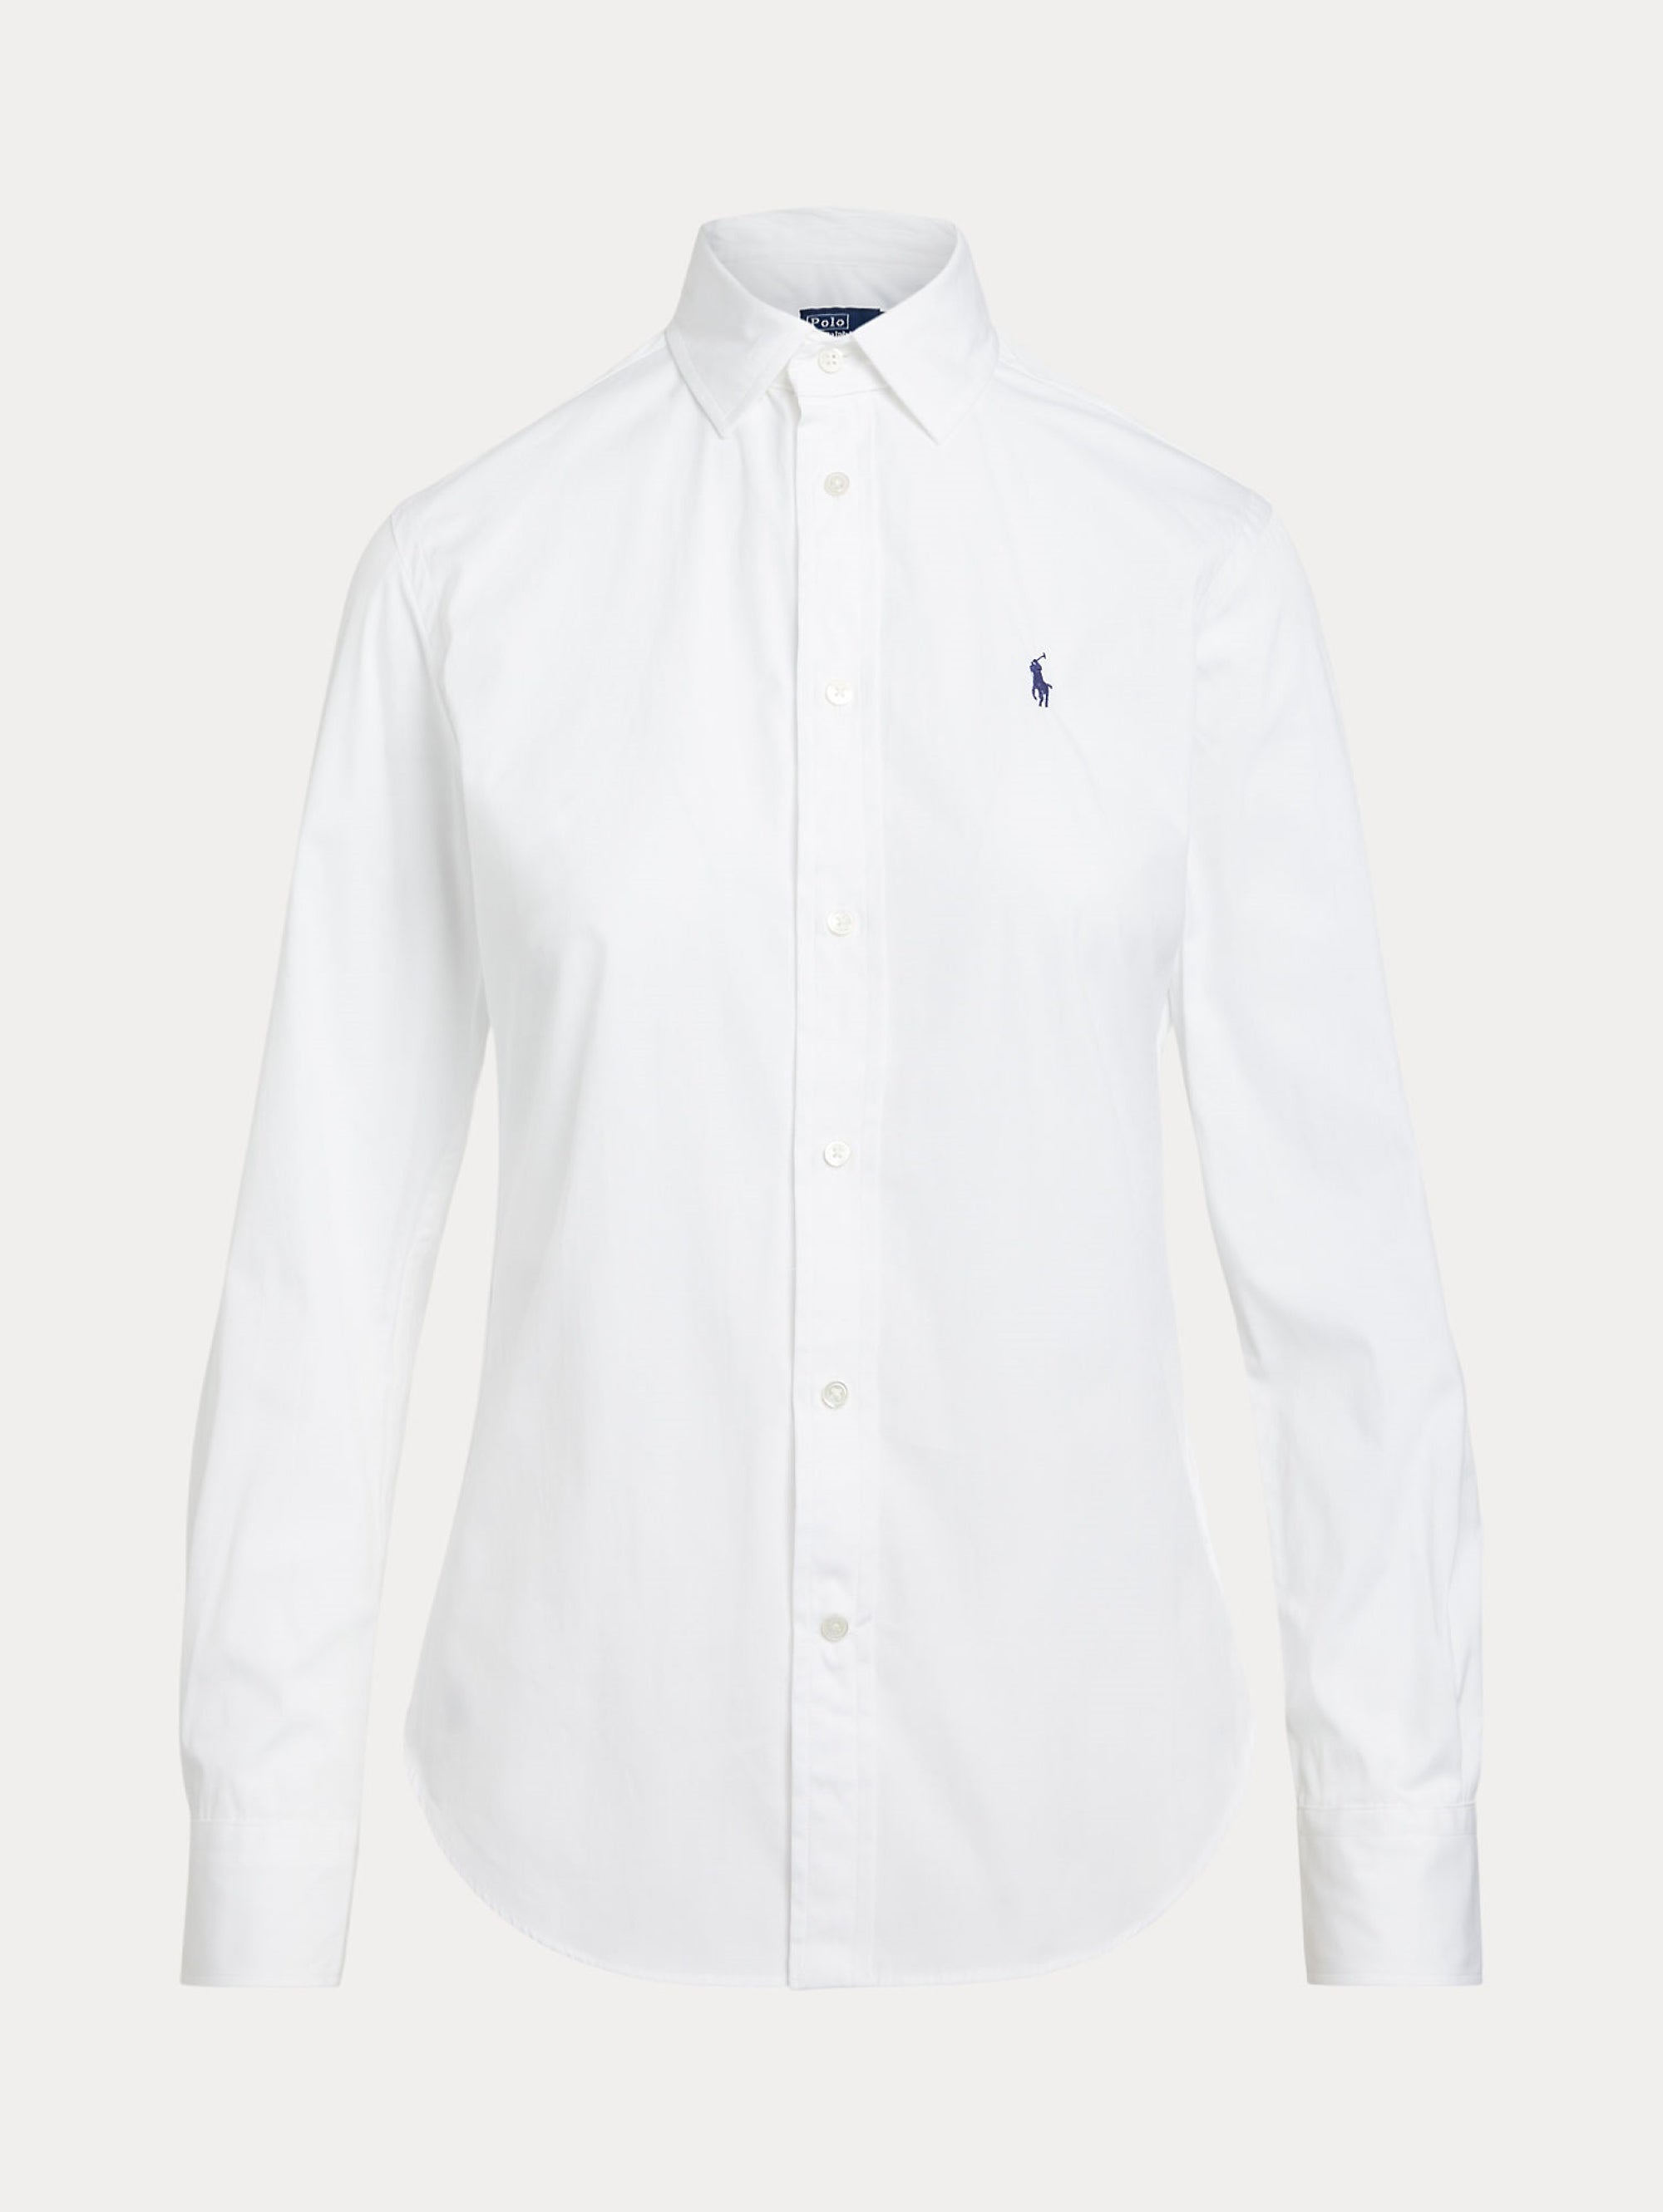 Classic Fit White Shirt